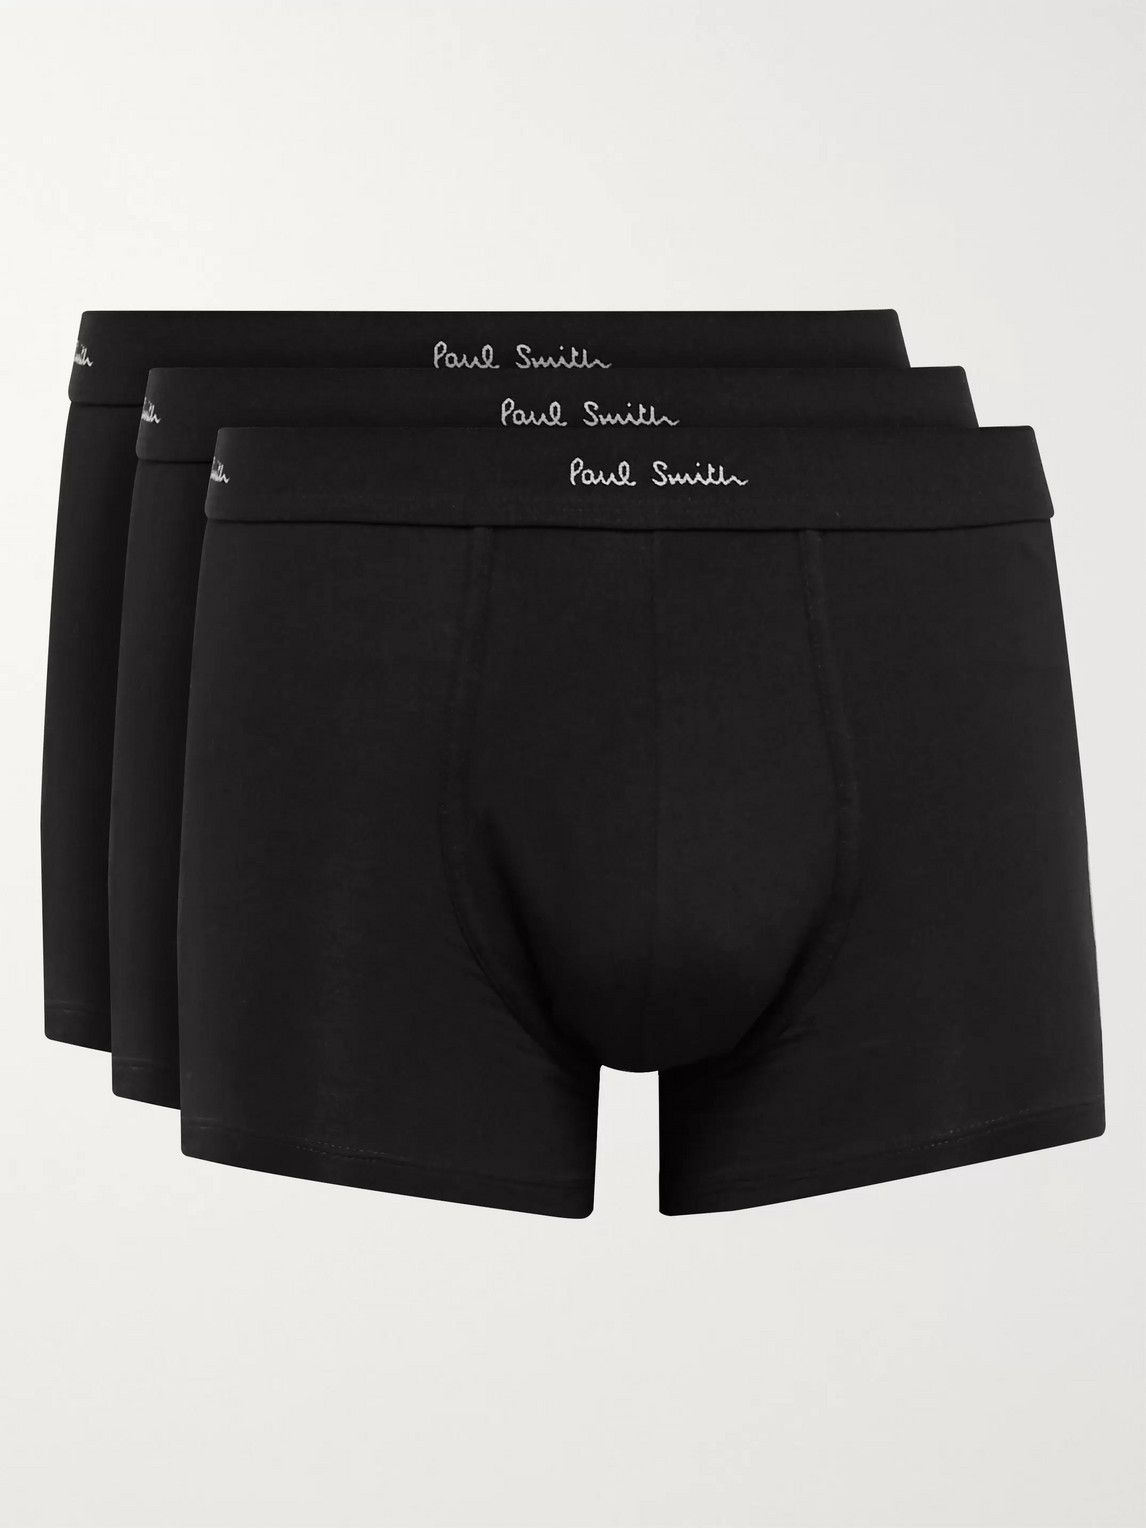 PAUL SMITH THREE-PACK STRETCH COTTON-JERSEY BOXER BRIEFS